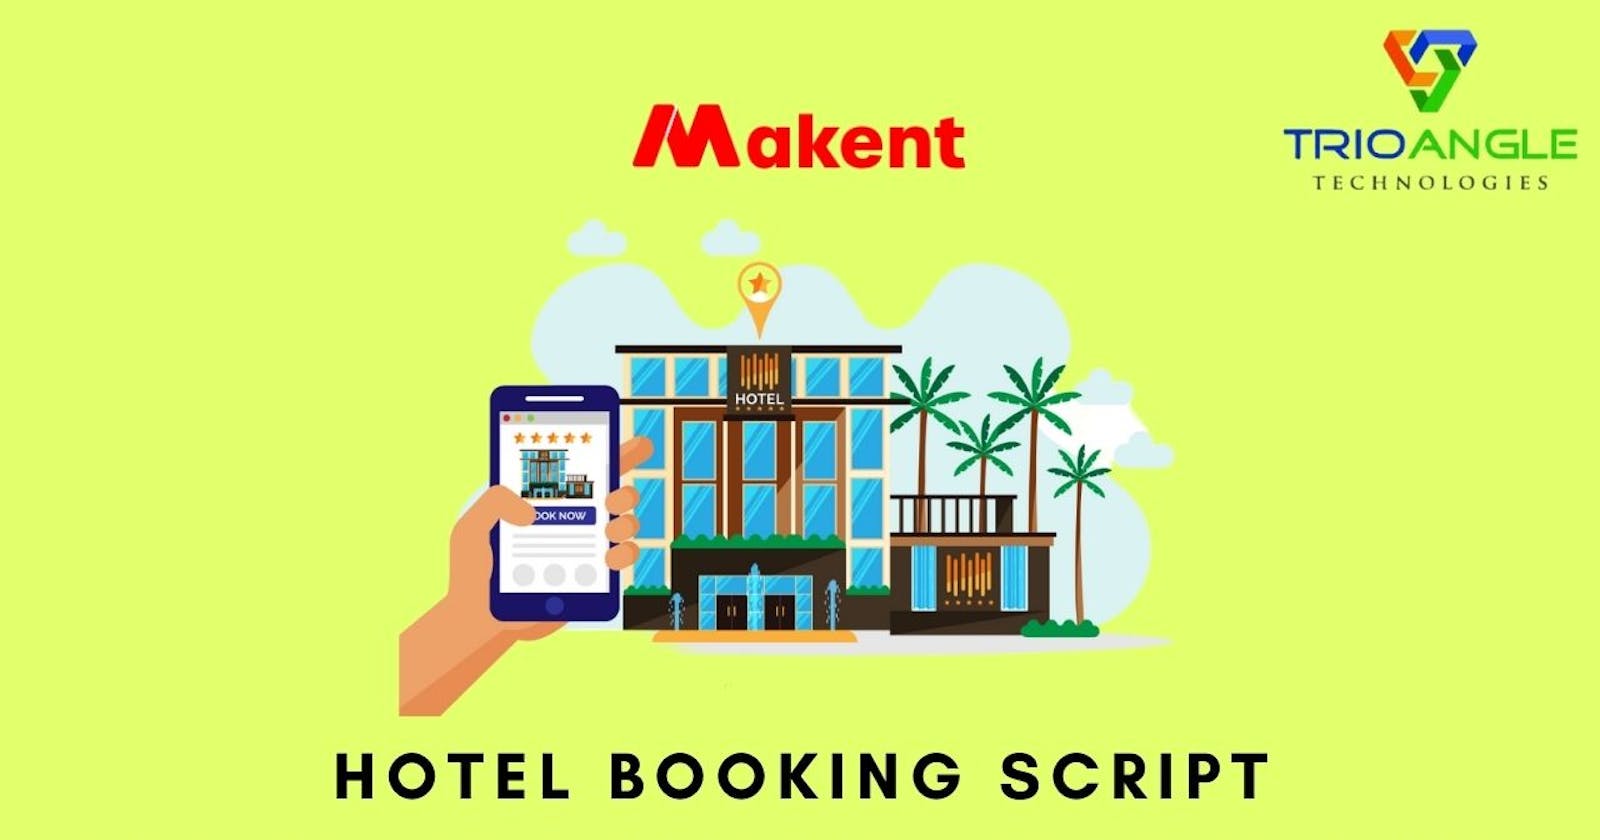 What are the recommended Rental Scripts for a hotel booking application?